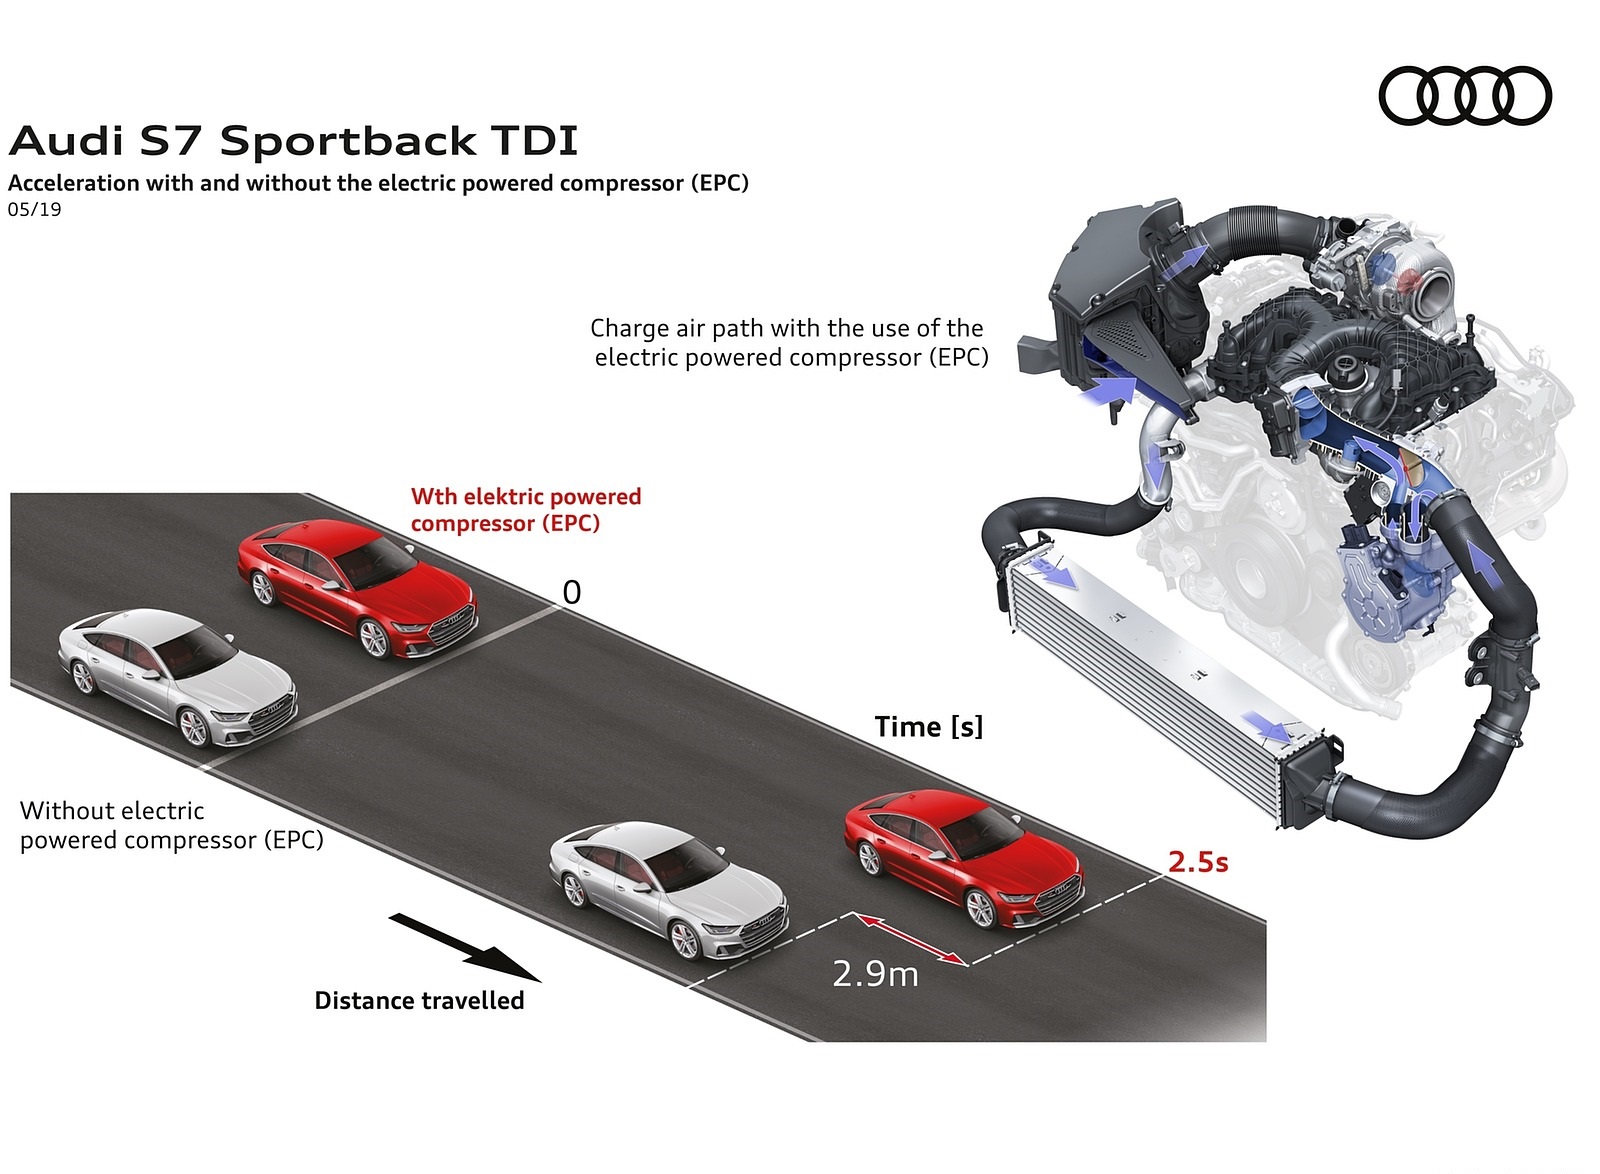 2020 Audi S7 Sportback TDI Acceleration with and without Electric Powered Compressor (EPC) Wallpapers #84 of 88